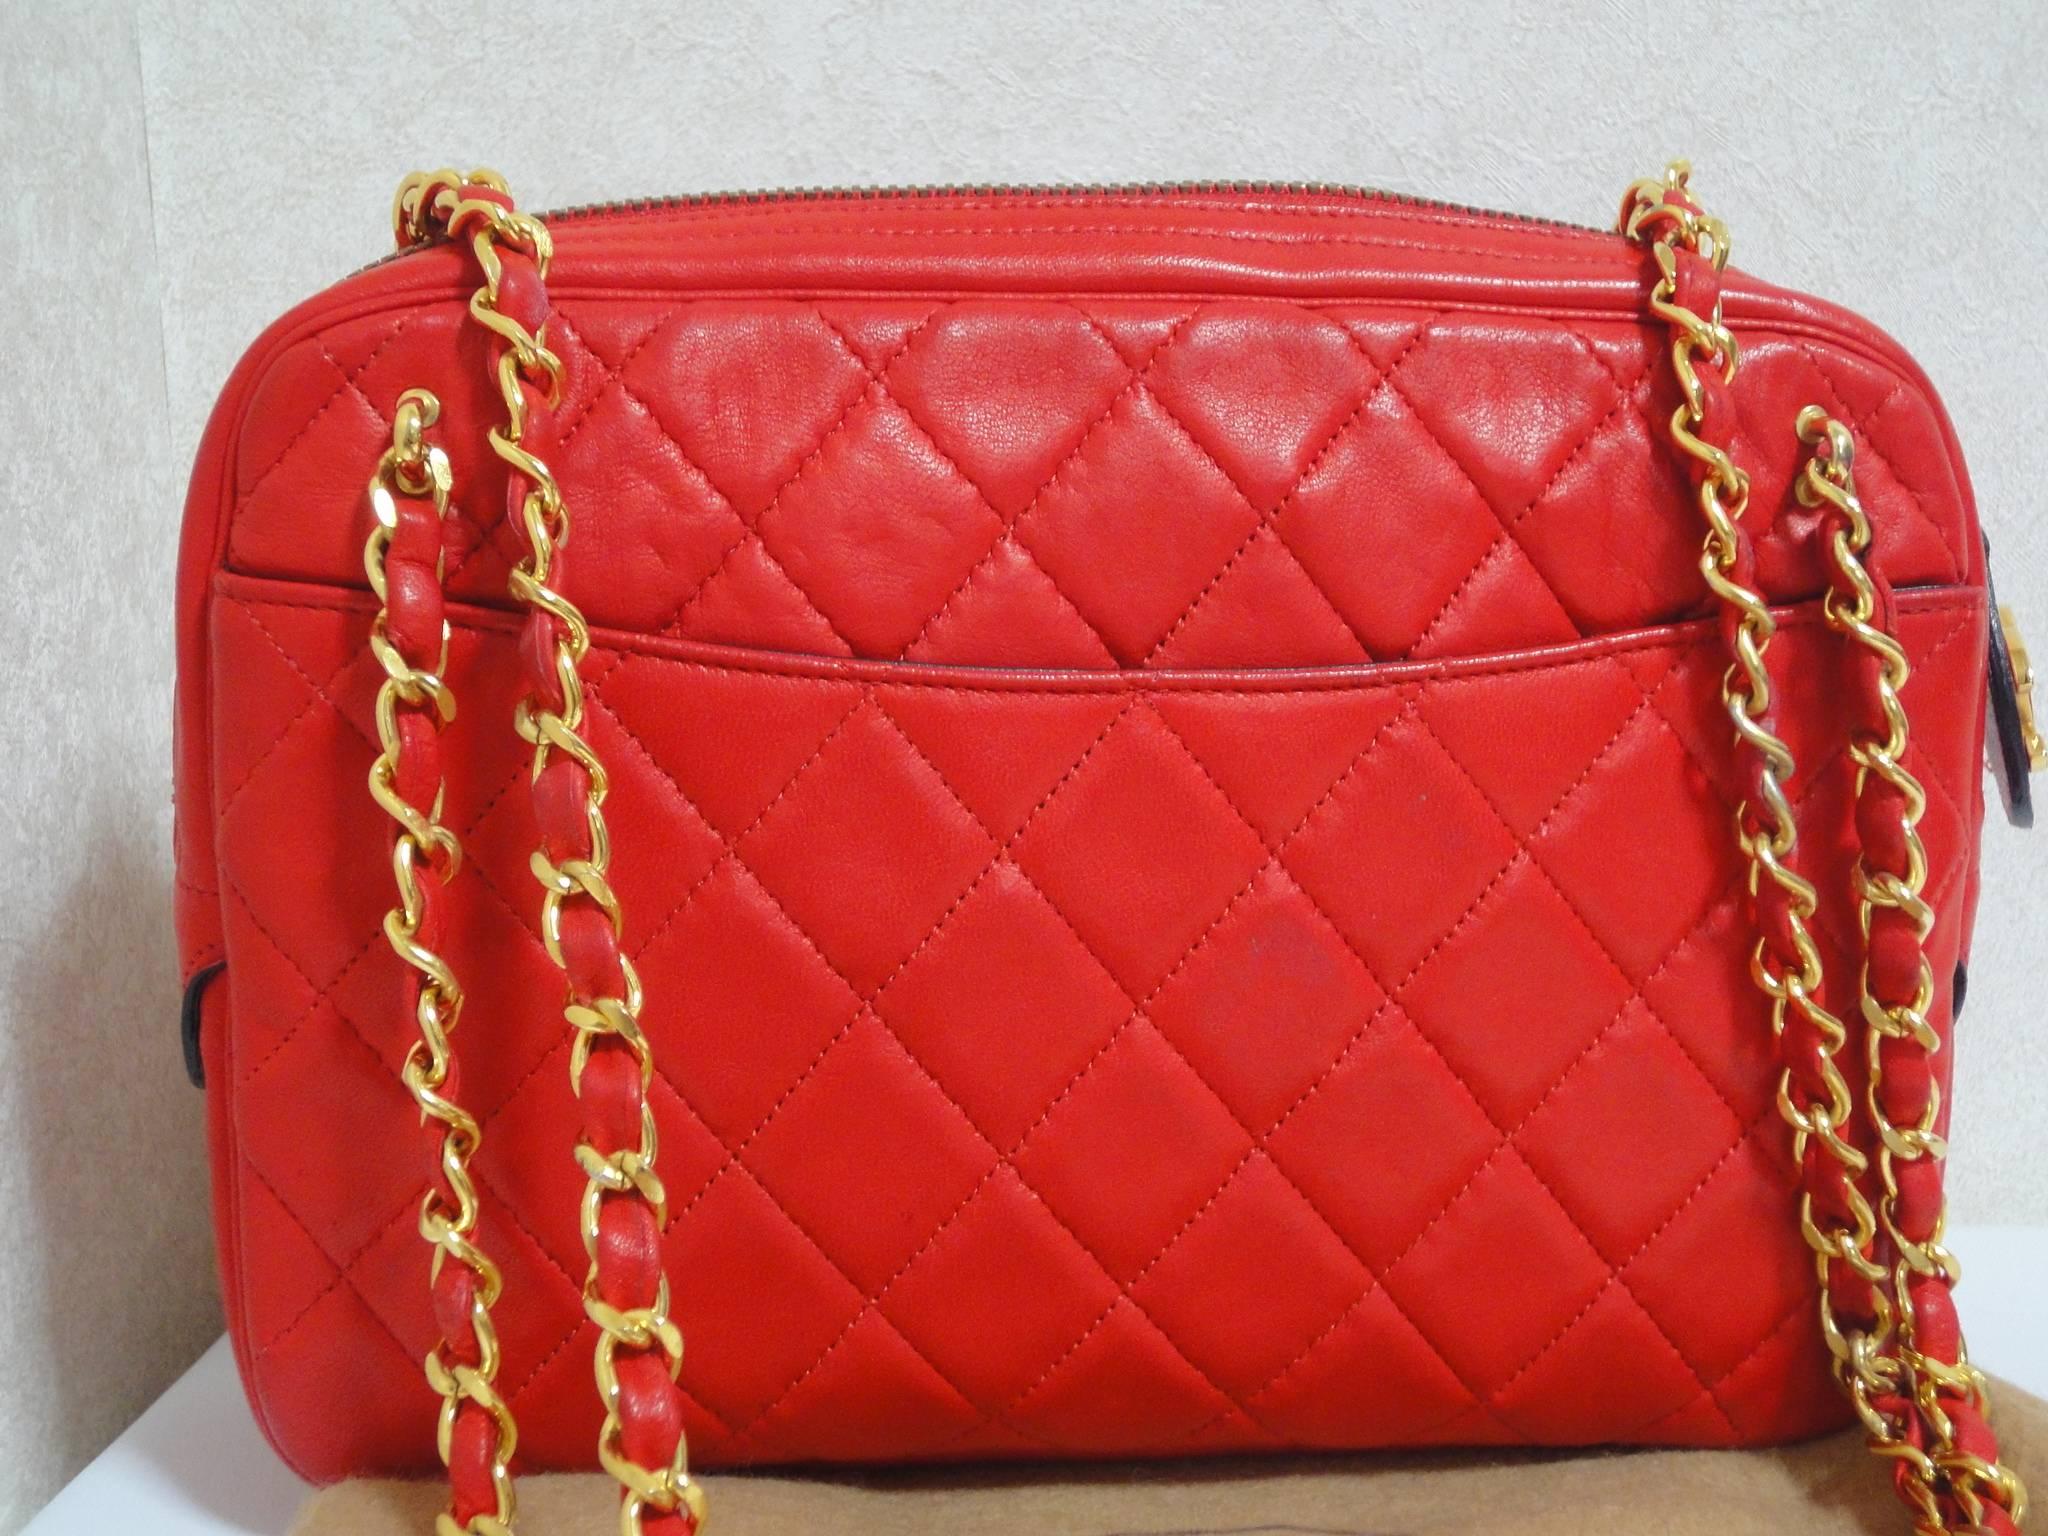 1980s Vintage CHANEL red lambskin classic shoulder purse with double gold tone chain straps and a CC pull charm.

Introducing a vintage CHANEL red lambskin purse with gold tone chain straps. 
One of the most classic and popular styles from CHANEL